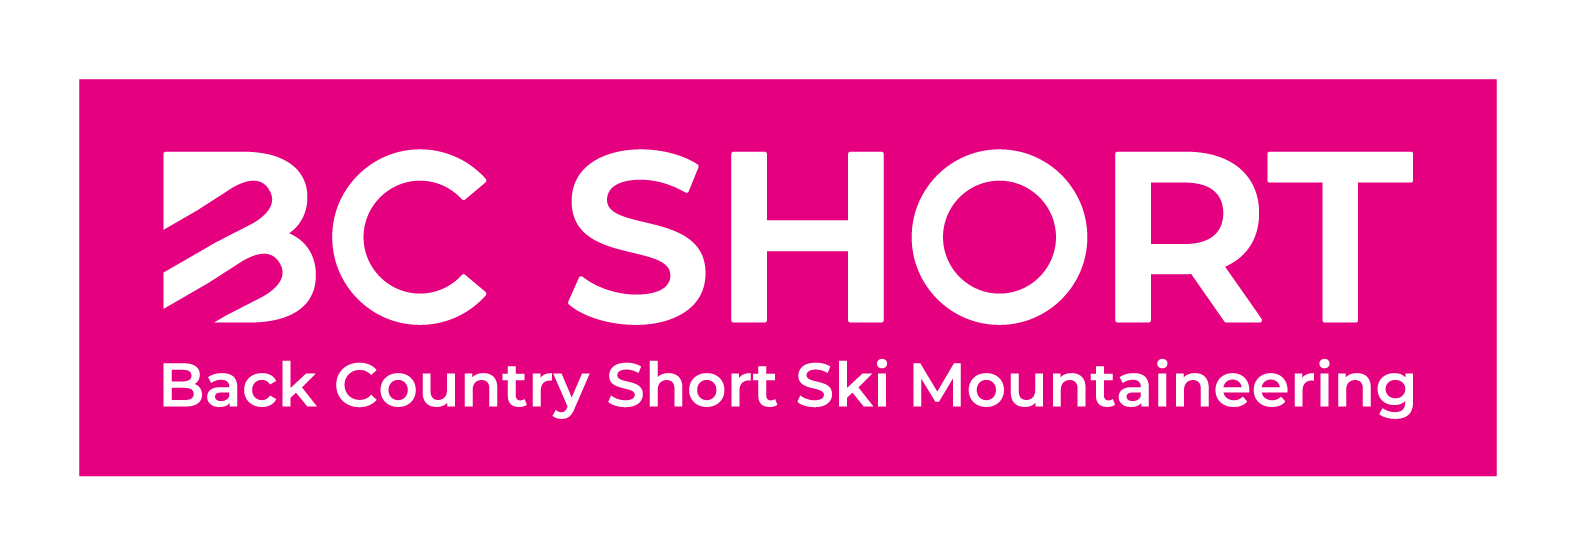 BC SHORT Back Country Short Ski Mountaineering